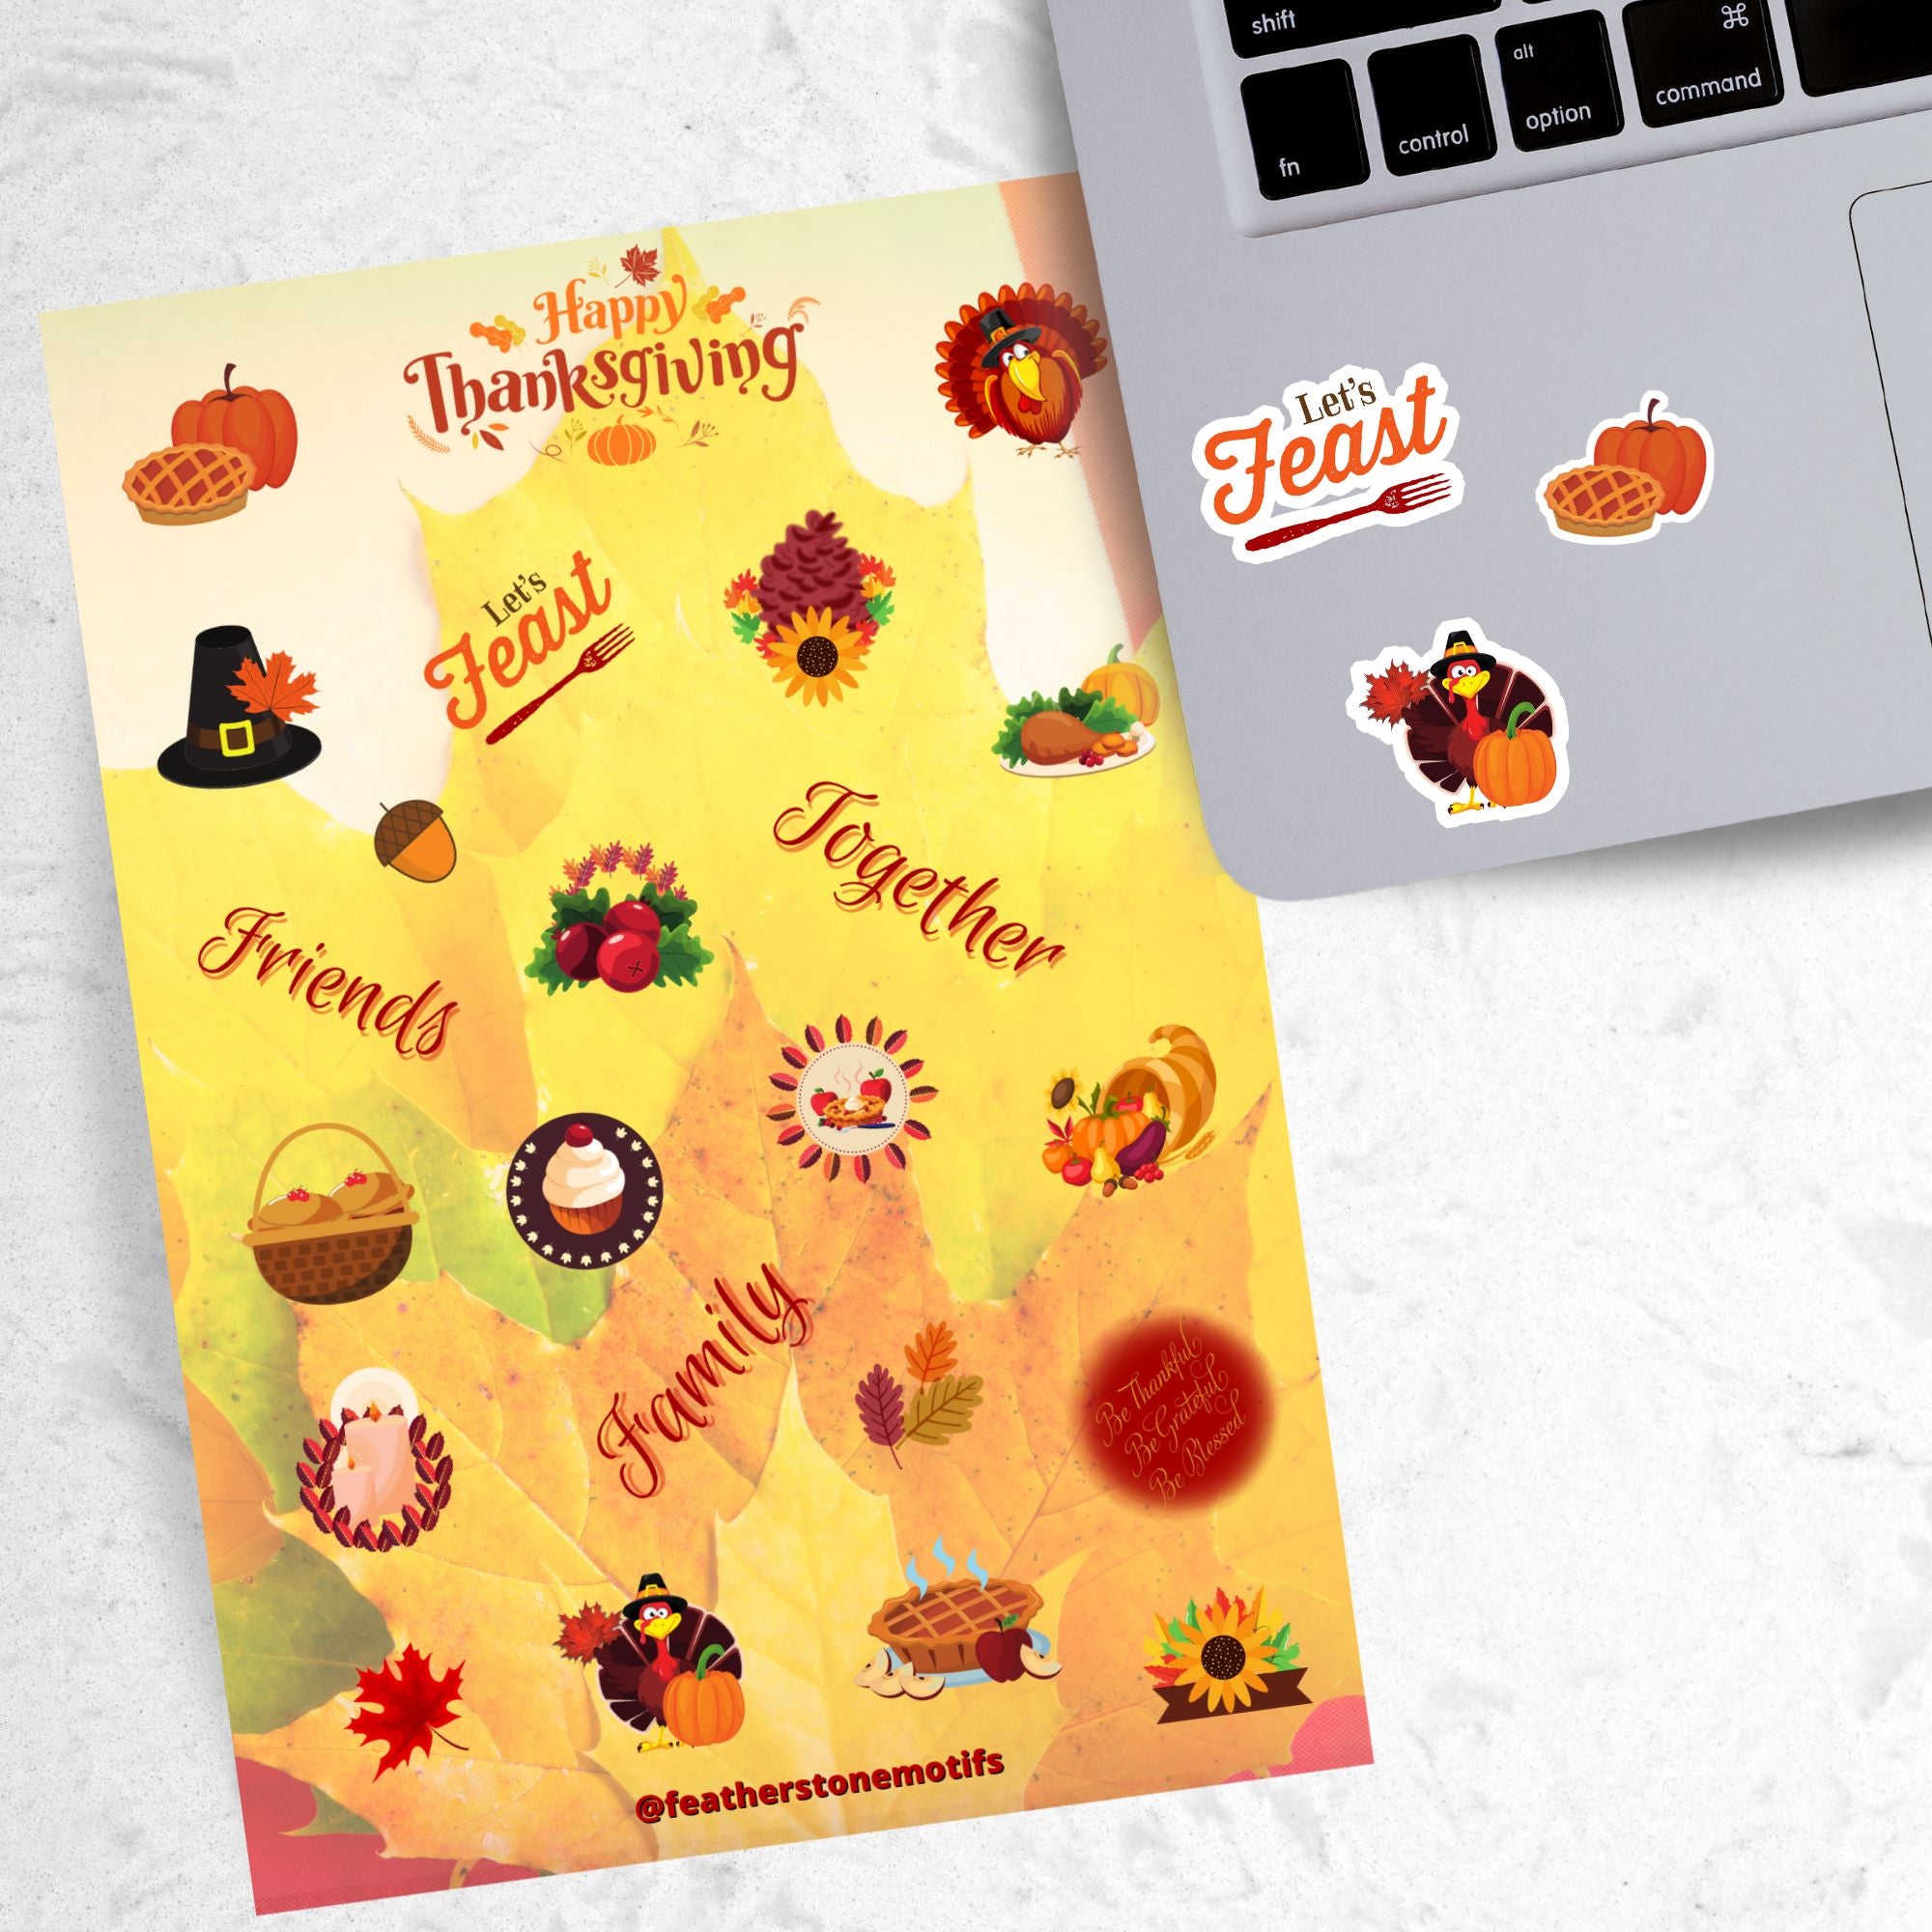 This festive Thanksgiving sticker sheet is perfect for decorating or scrapbooking. It features all of your favorite Thanksgiving images and inspirational sayings. Let the feast begin! This image shows the Happy Thanksgiving sticker sheet next to a laptop with stickers of pumpkin and pumpkin pie, a turkey dressed as a pilgrim, and the words "Let's Feast" applied below the keyboard.